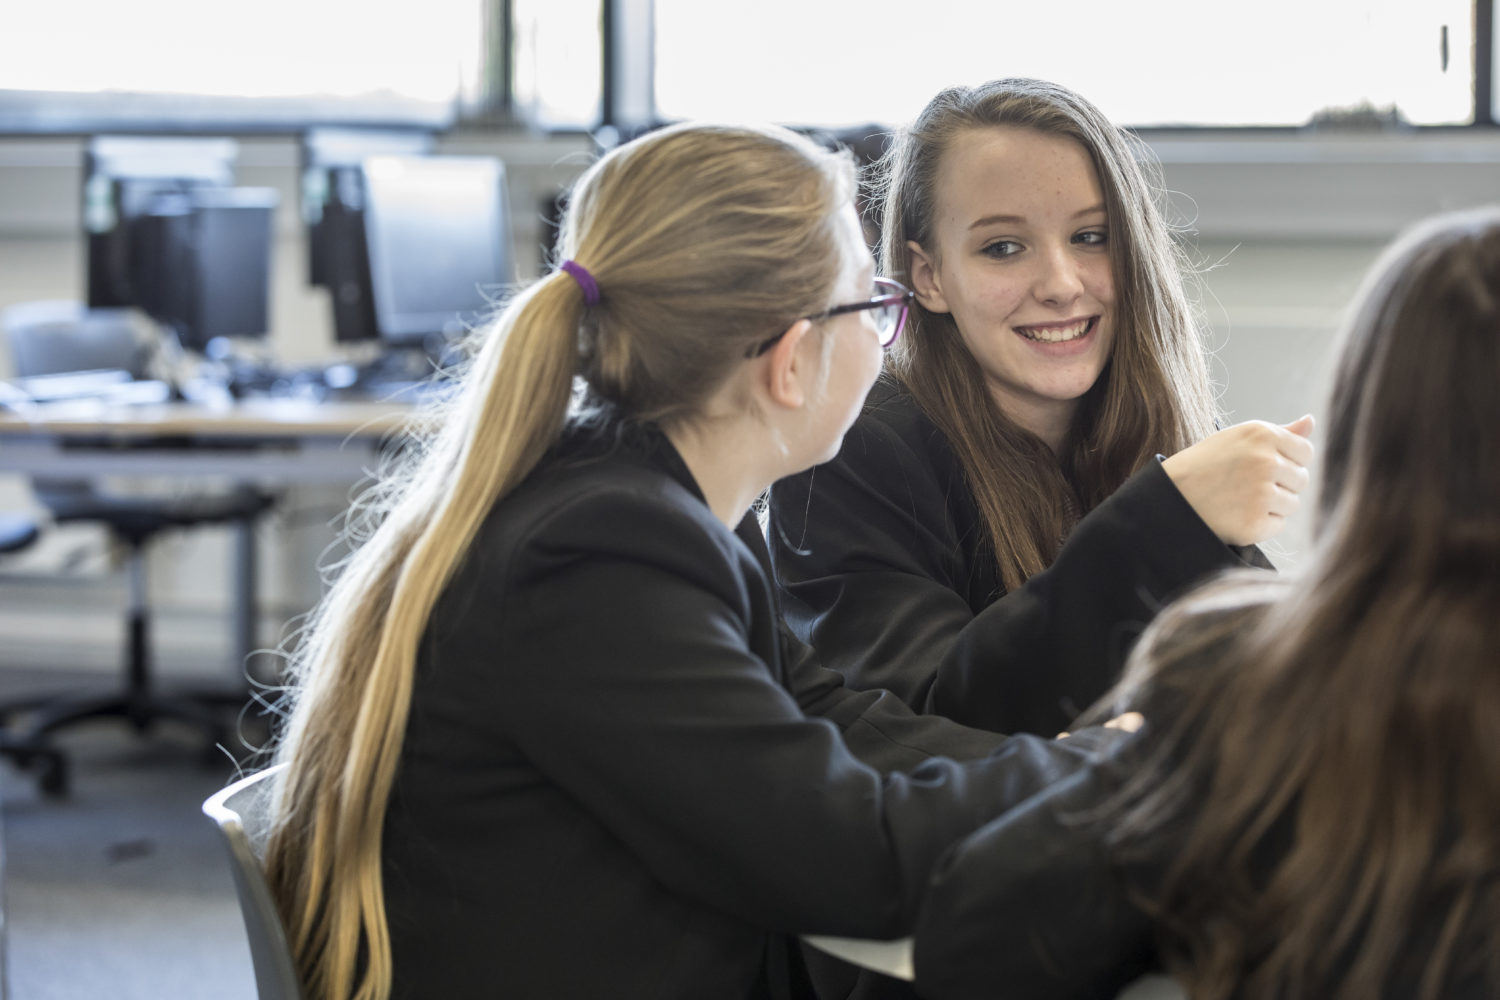 Three Strood Academy students are shown smiling together whilst working.